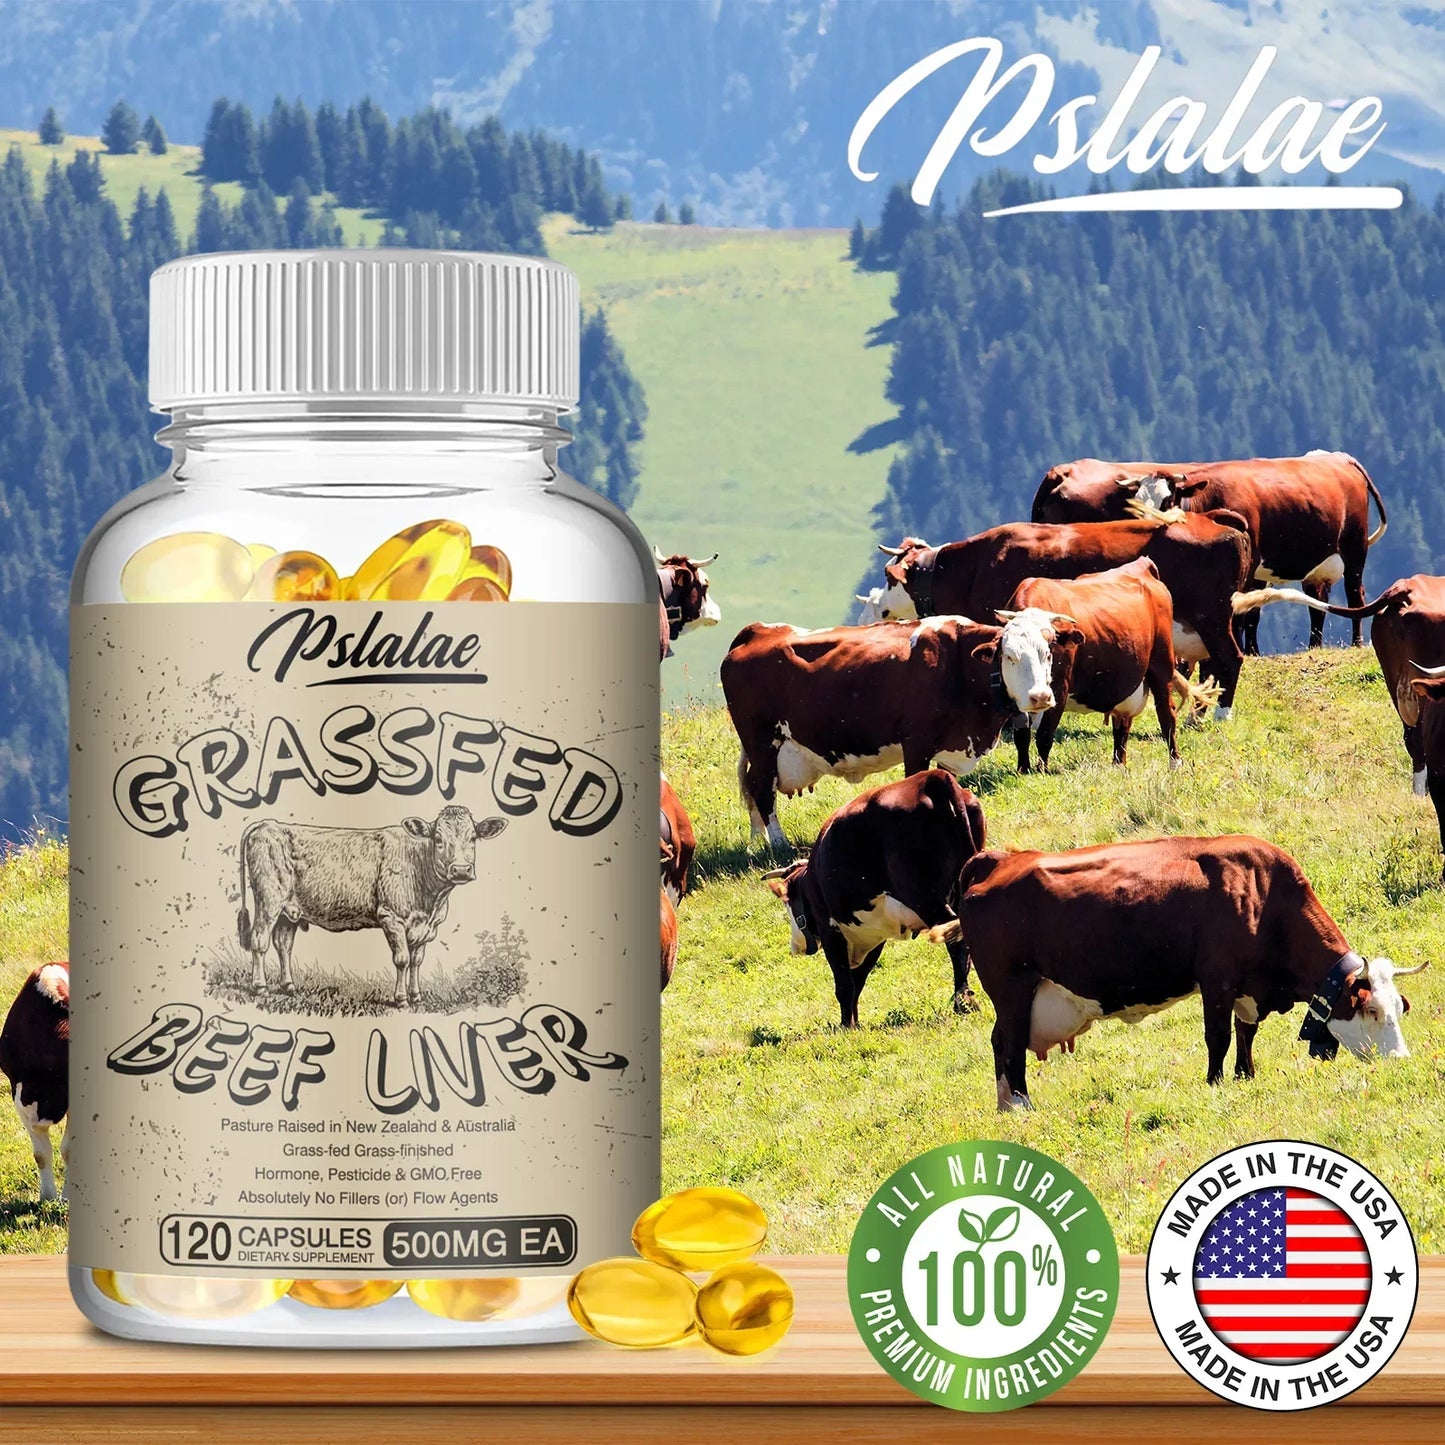 Time-honored Liver Supplement - Grass-Fed Bee in Pakistan